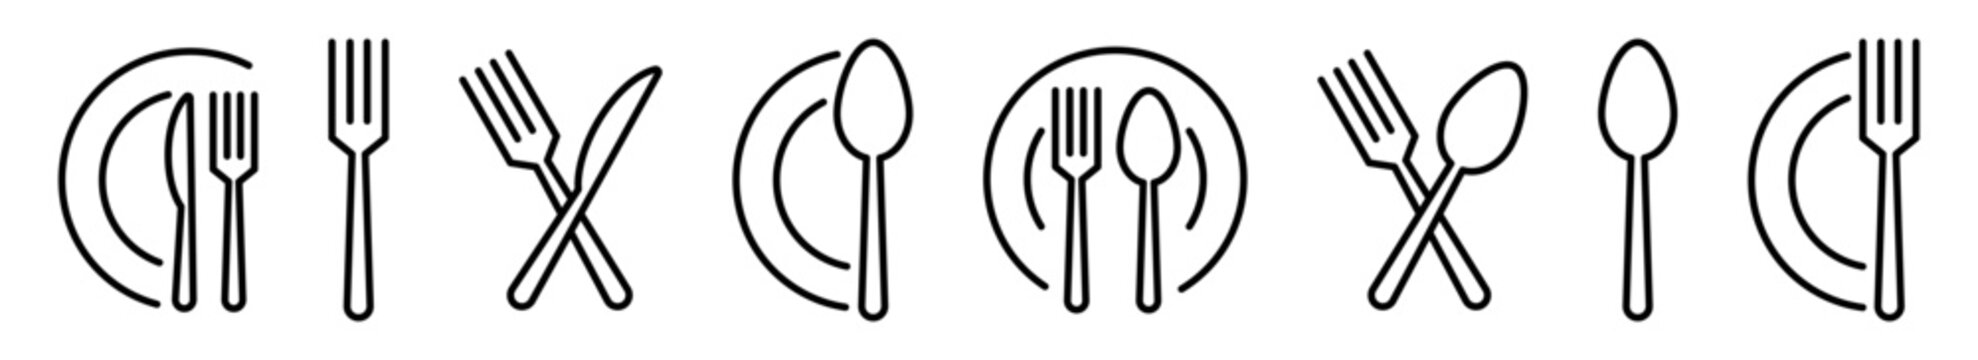 Cutlery vector icon set. Fork, Spoon and Knife icons. Silverware icons. Black silverware icon